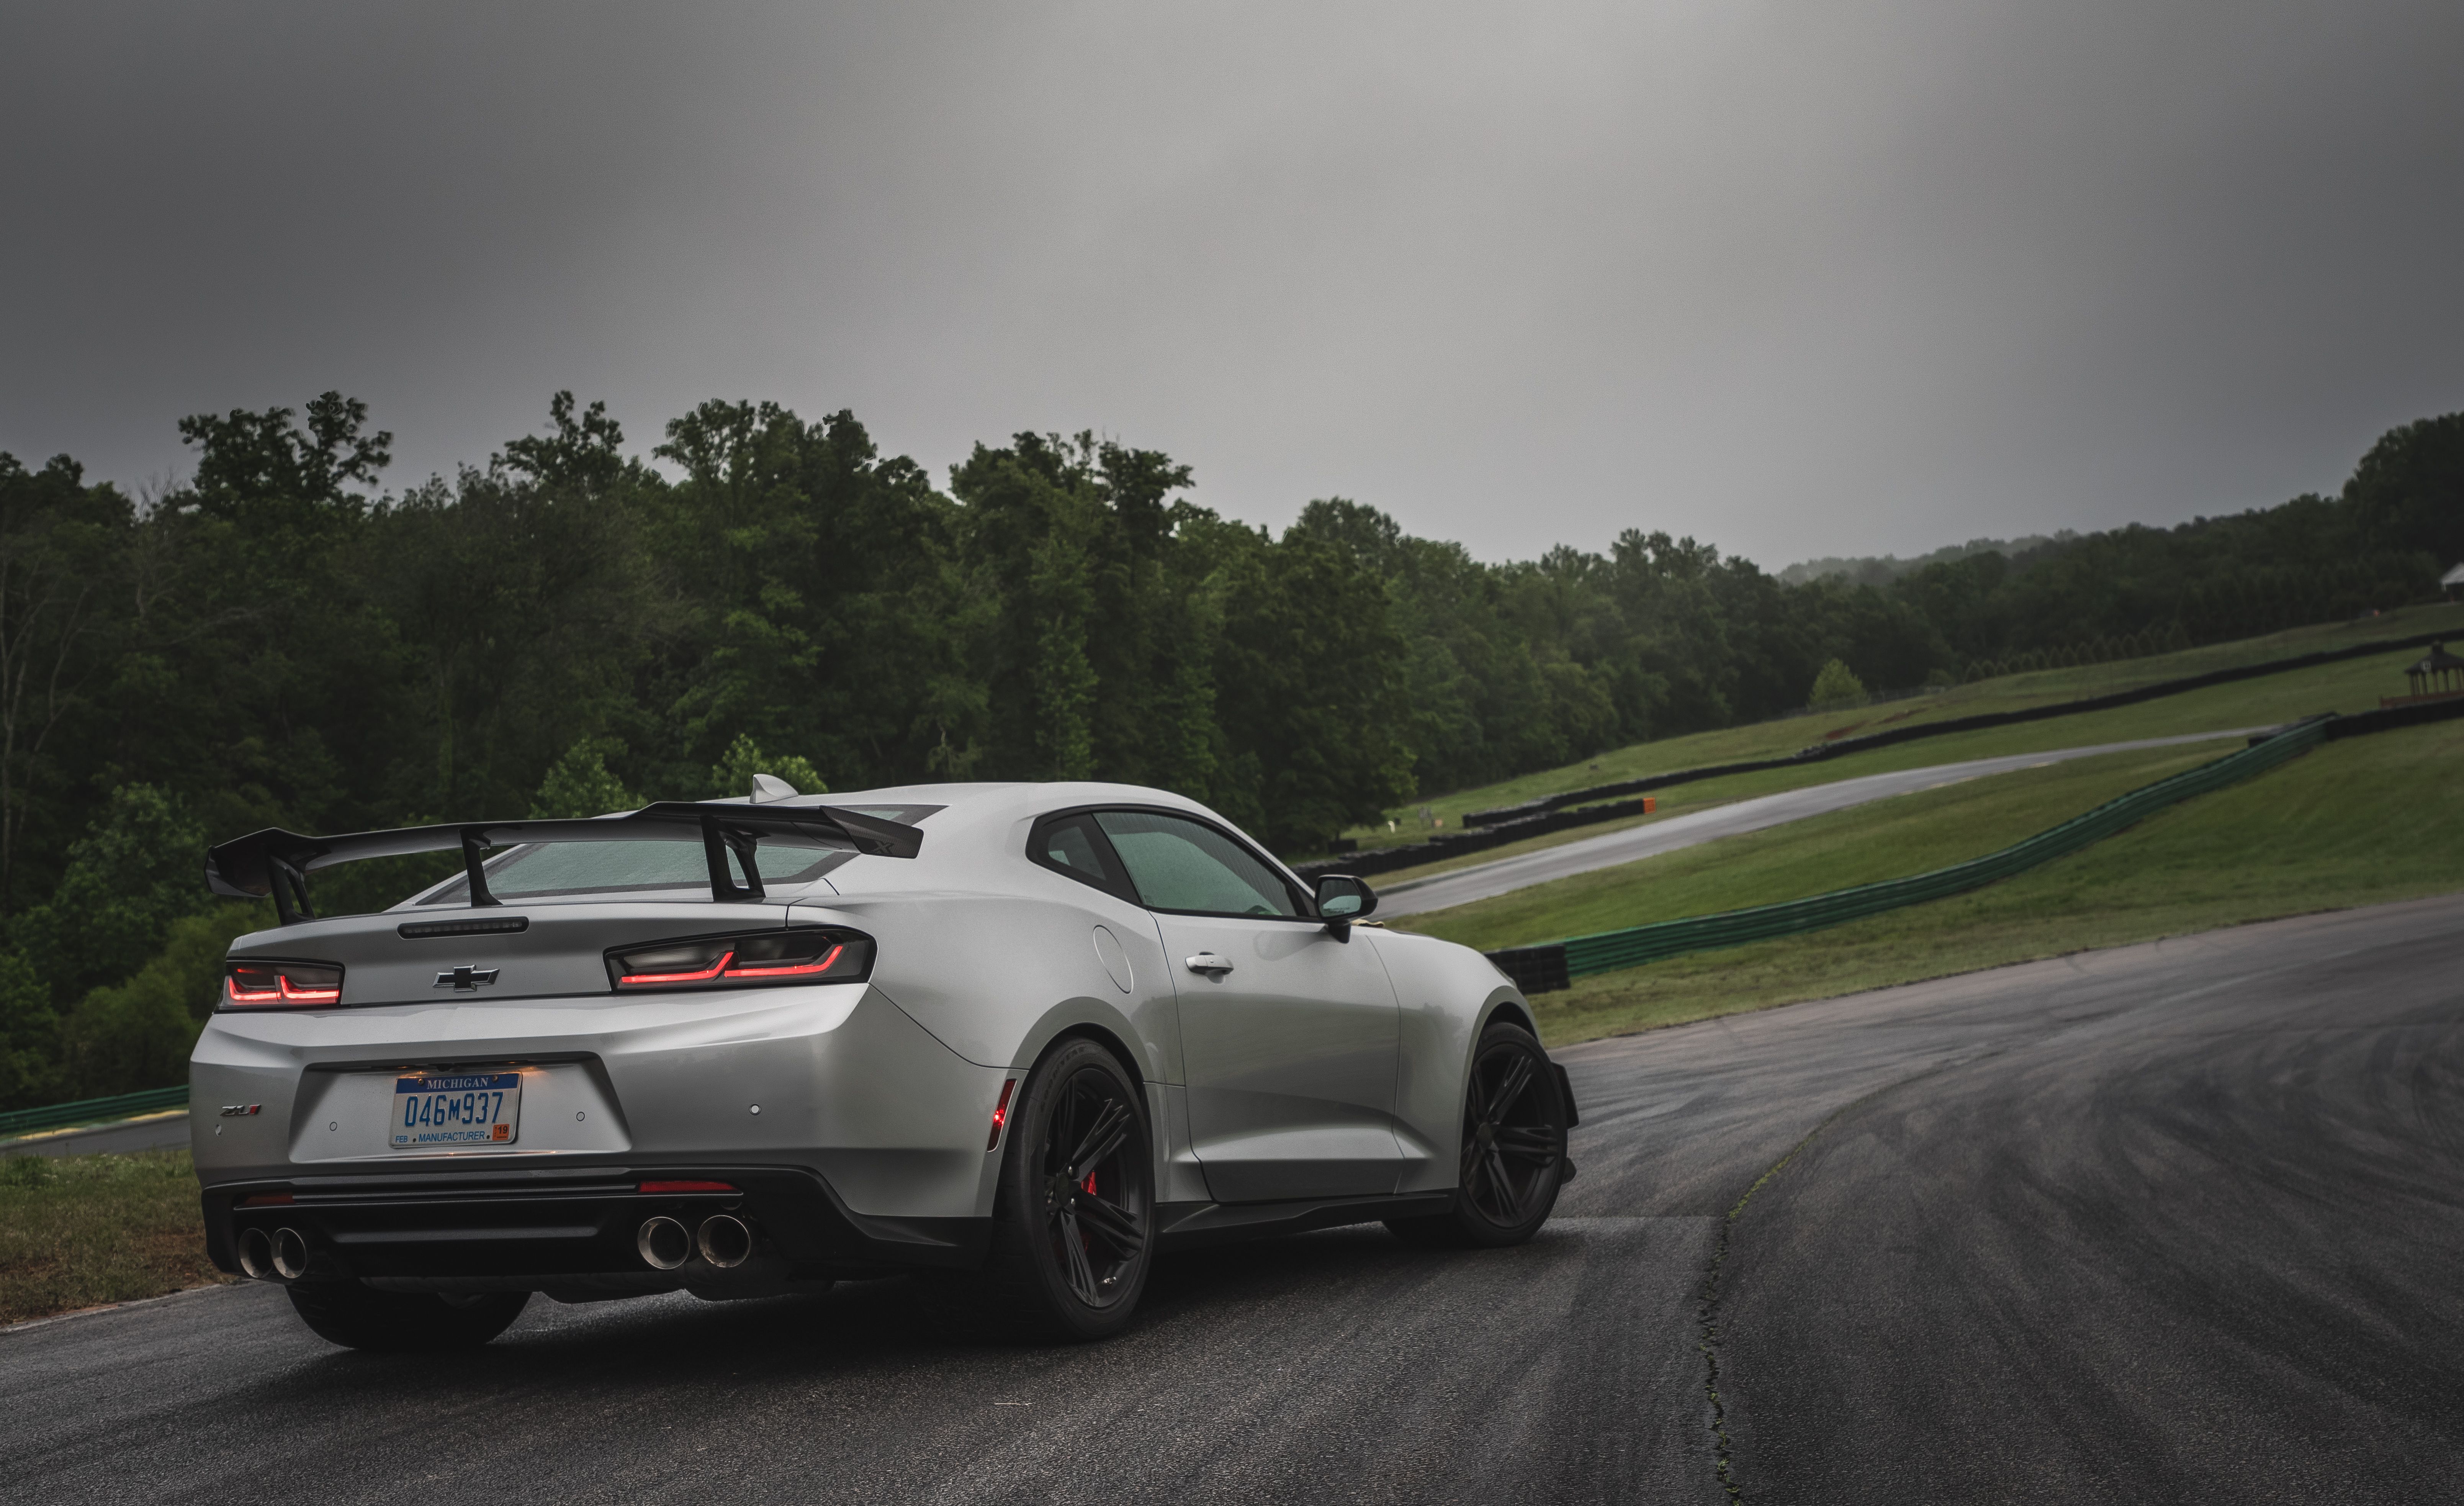 What Sets The Chevrolet Camaro Zl1 1le Apart From The Zl1